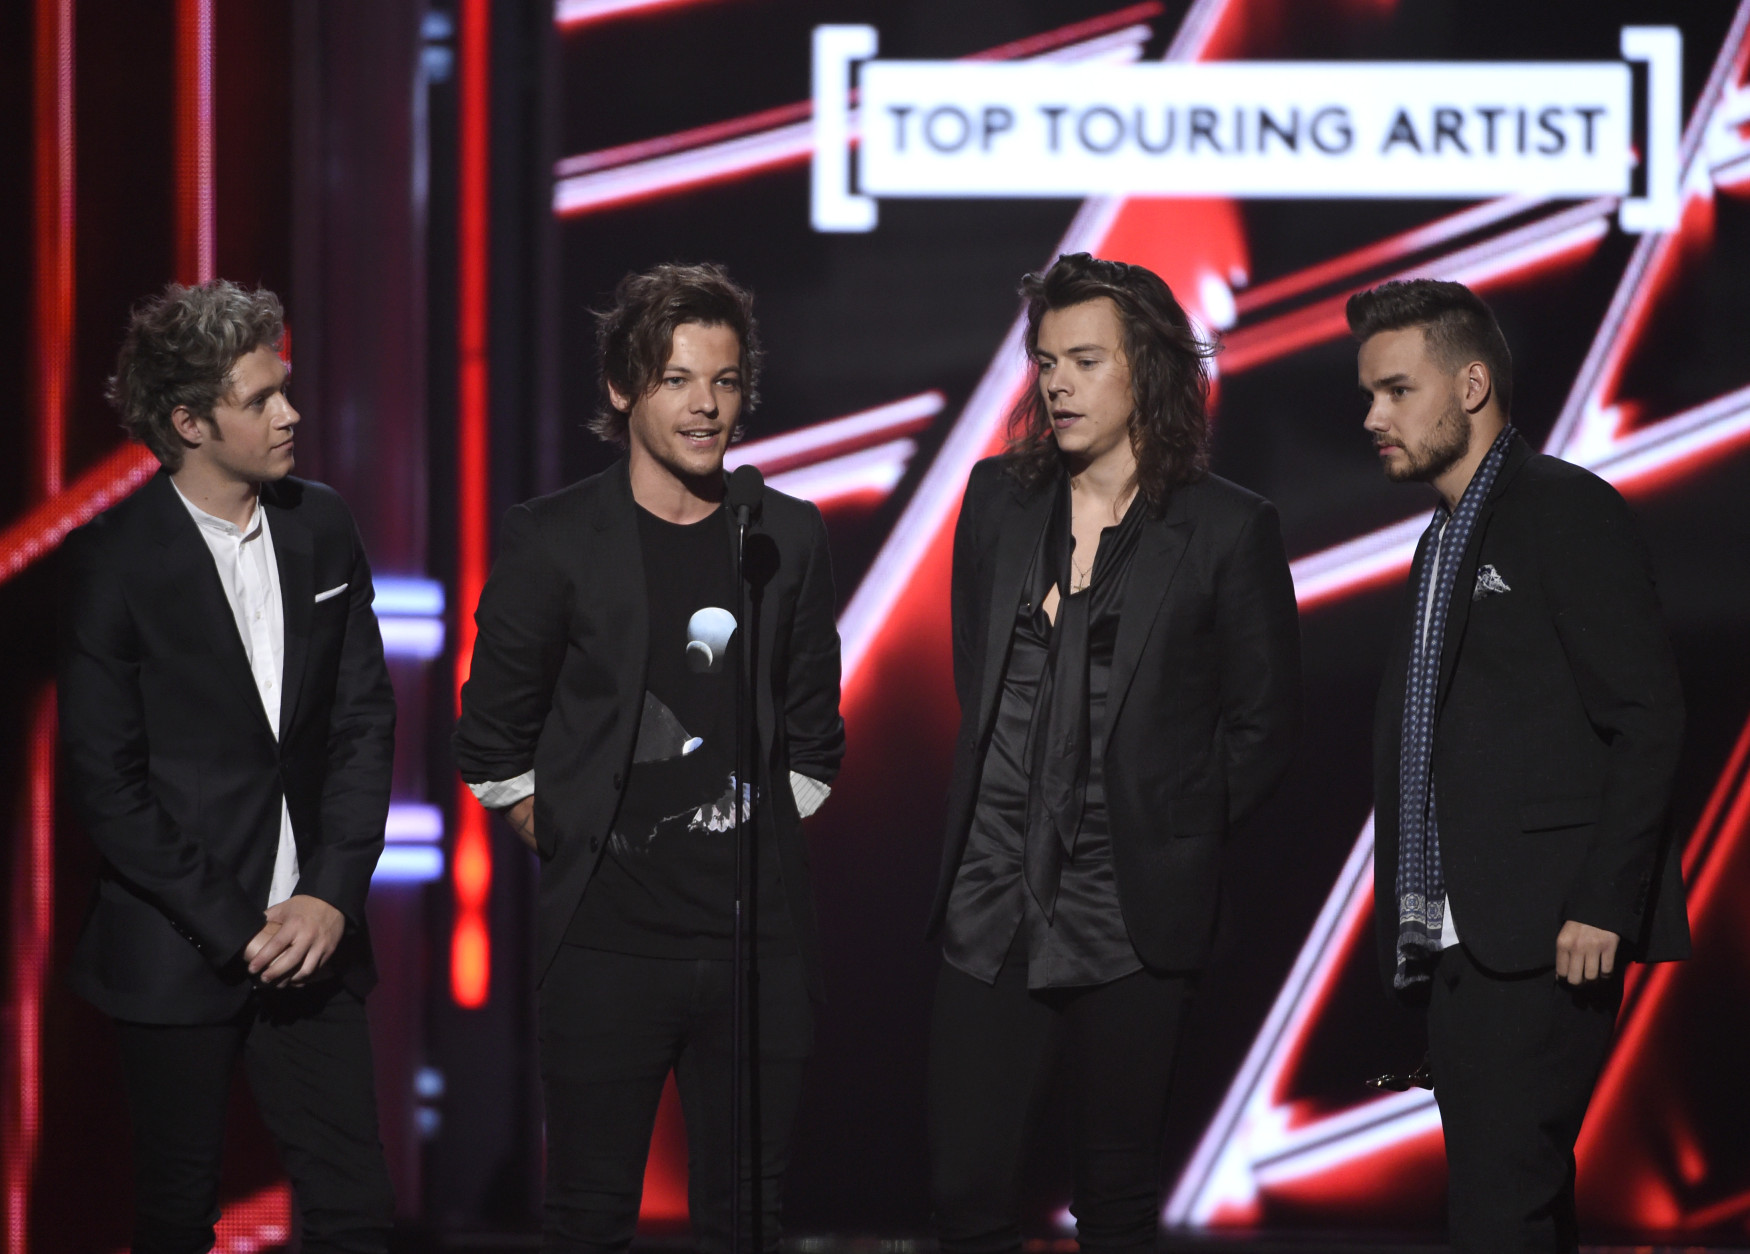 Niall Horan, from left, Louis Tomlinson, Harry Styles, and Liam Payne of One Direction accept the award for top touring artist at the Billboard Music Awards at the MGM Grand Garden Arena on Sunday, May 17, 2015, in Las Vegas. (Photo by Chris Pizzello/Invision/AP)